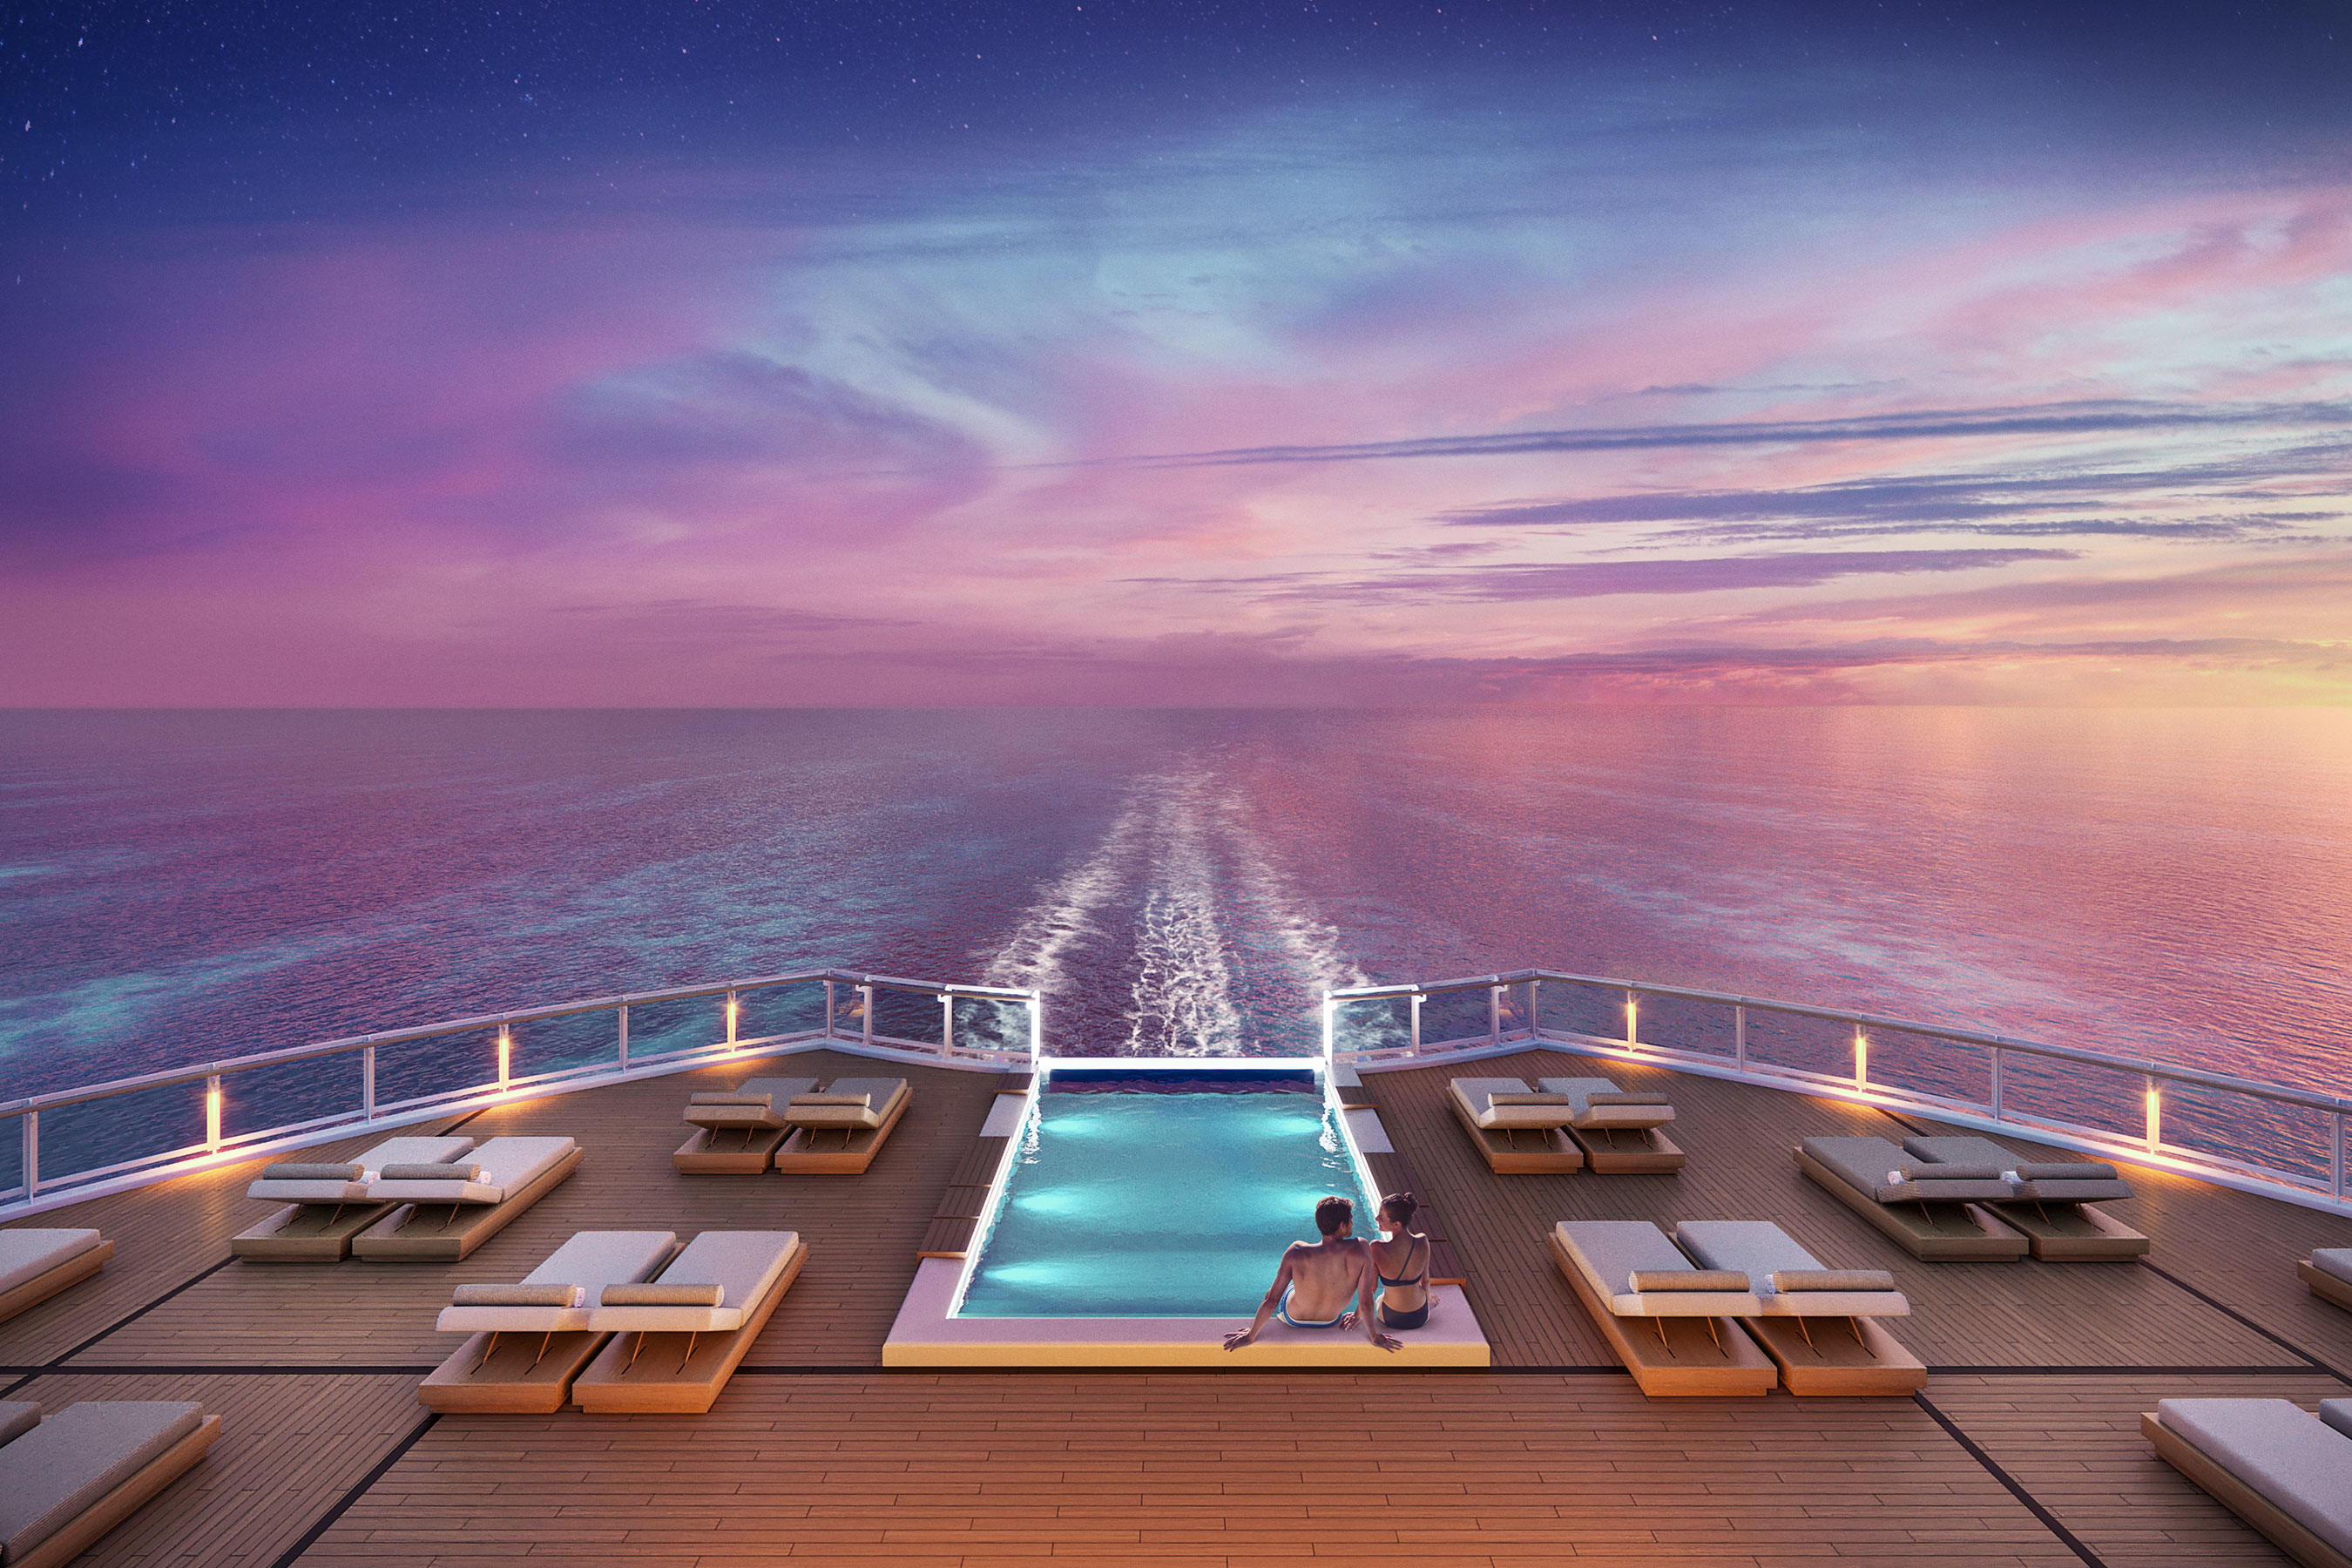 Norwegian Viva will boast a redefined The Haven by Norwegian, NCL’s ultra-premium keycard only access ship-within-a-ship concept. The Haven’s public areas and 107 suites will feature an expansive sundeck, a stunning infinity pool overlooking the ship's wake and an outdoor spa with a glass-walled sauna and cold room.